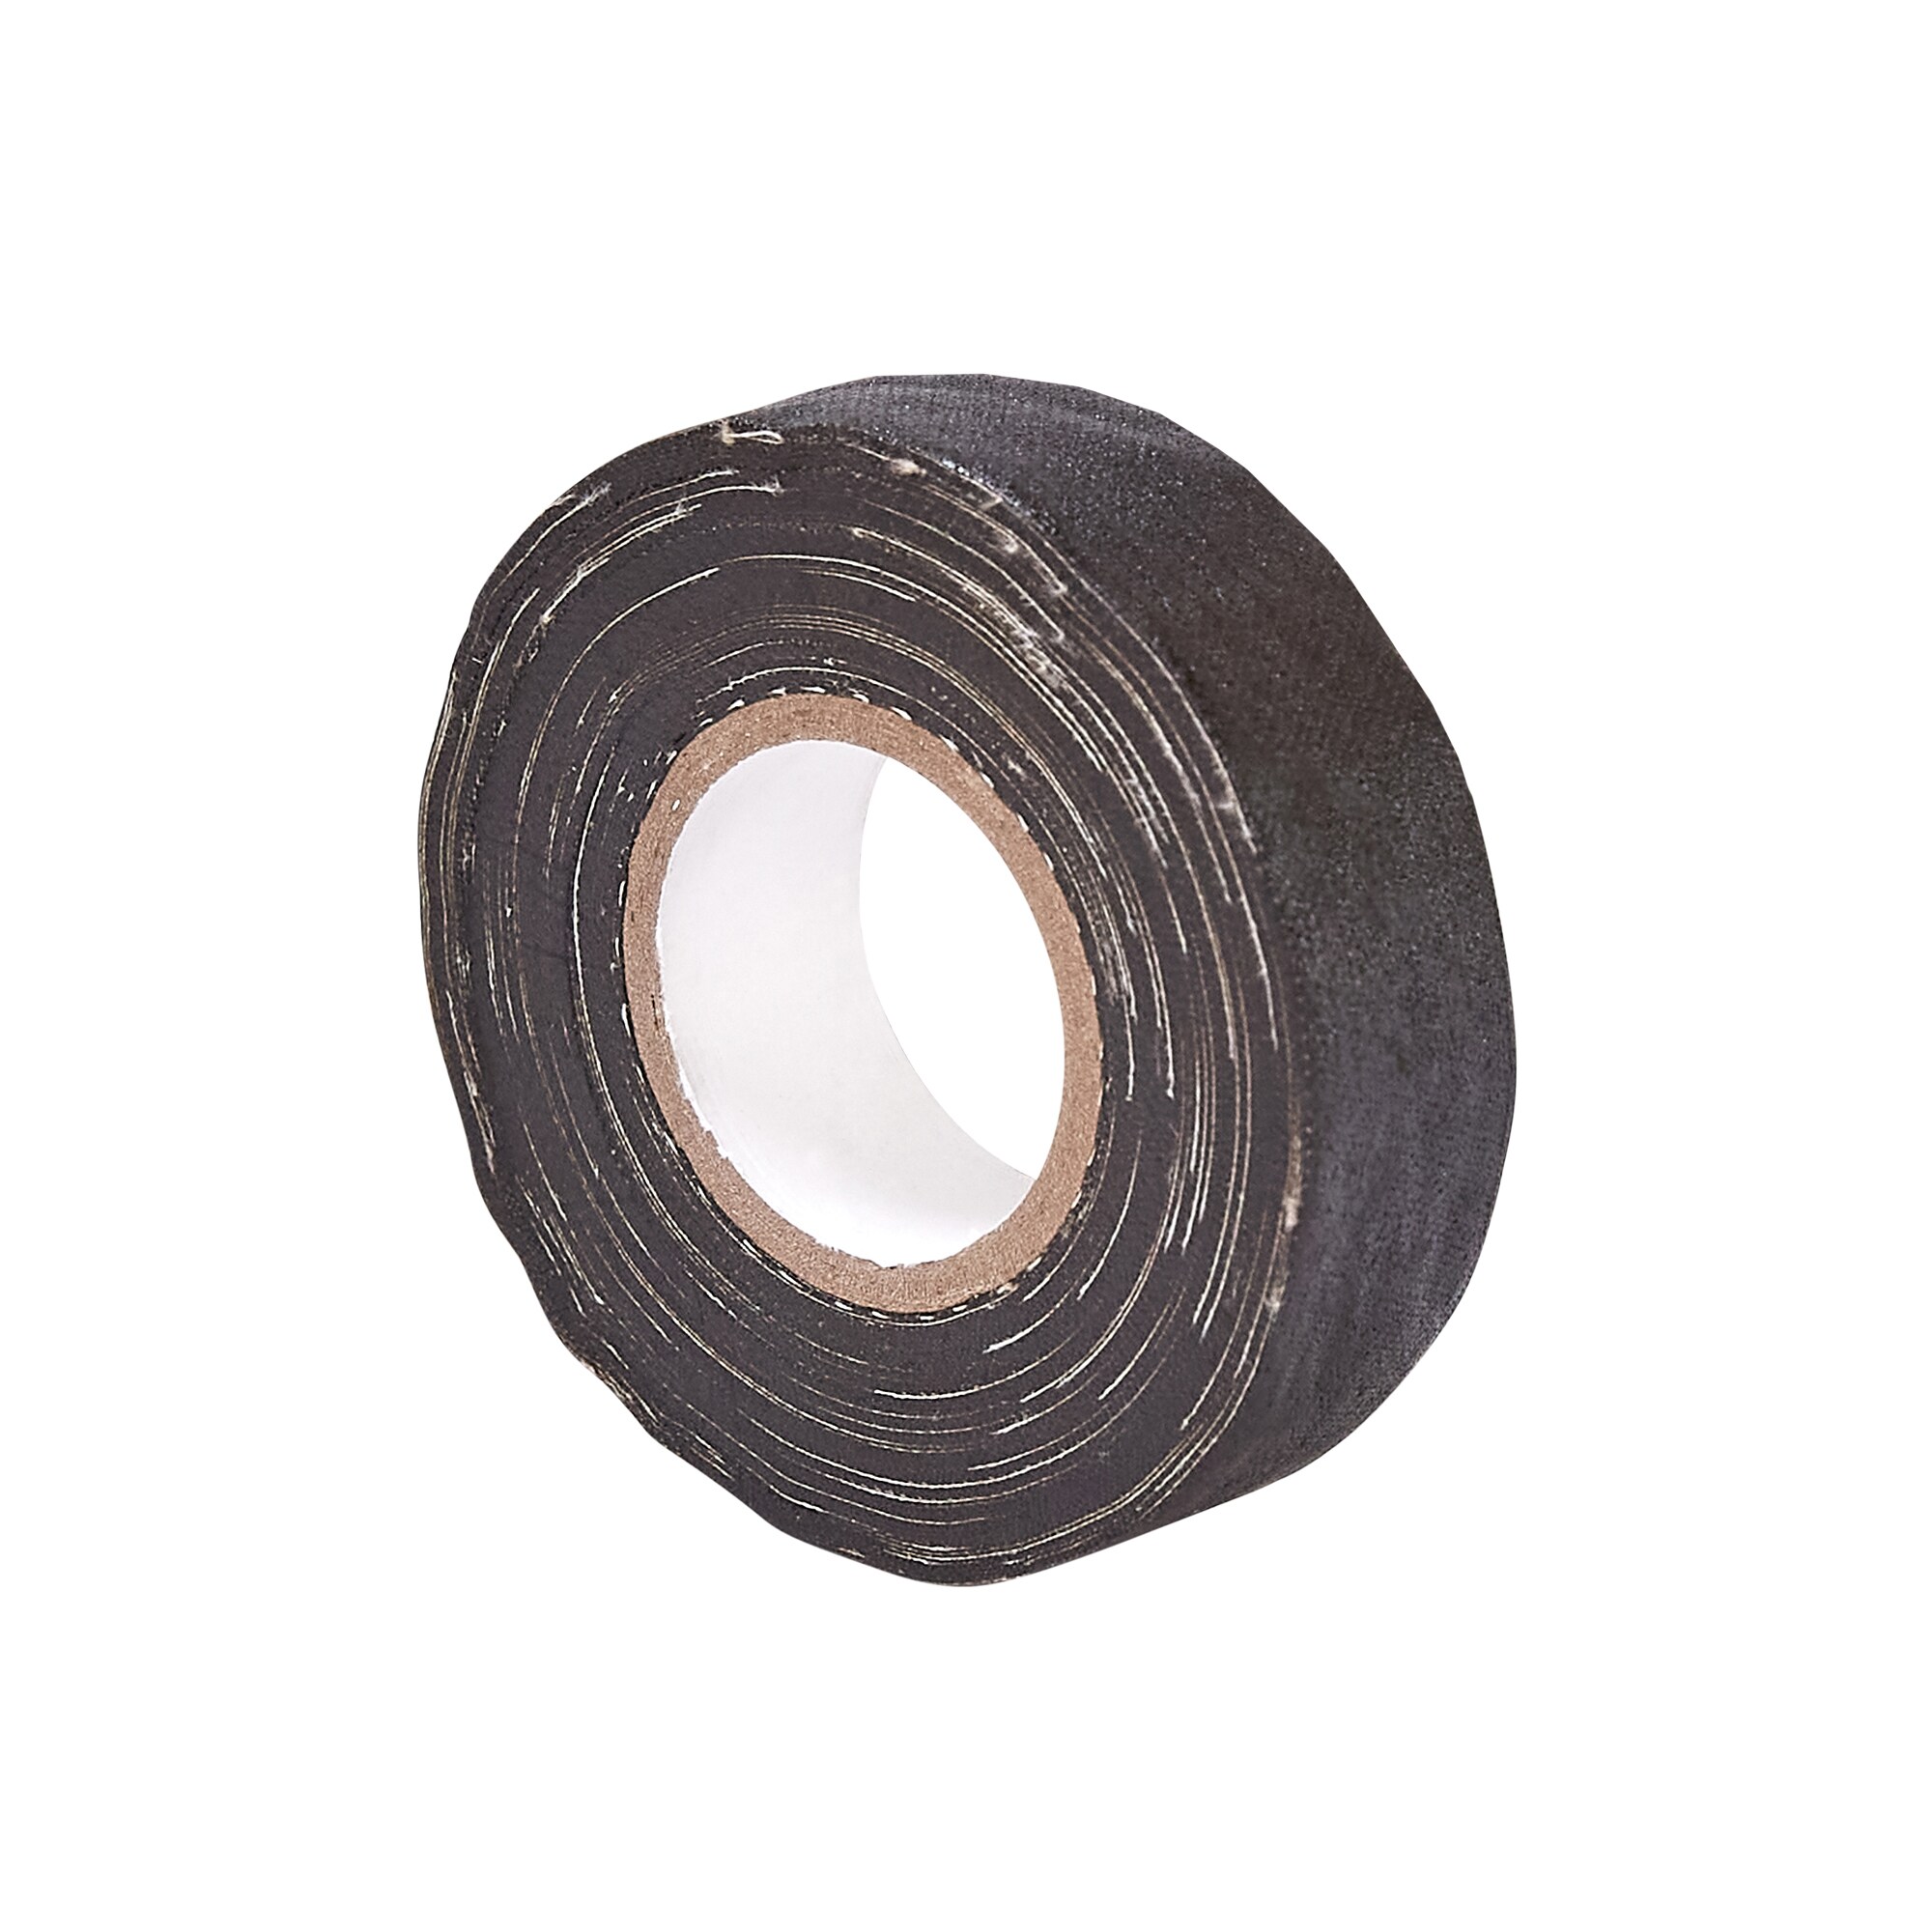 Electrical Tape Black Insulated Rolls Utilitech 10 Pack 60-ft 